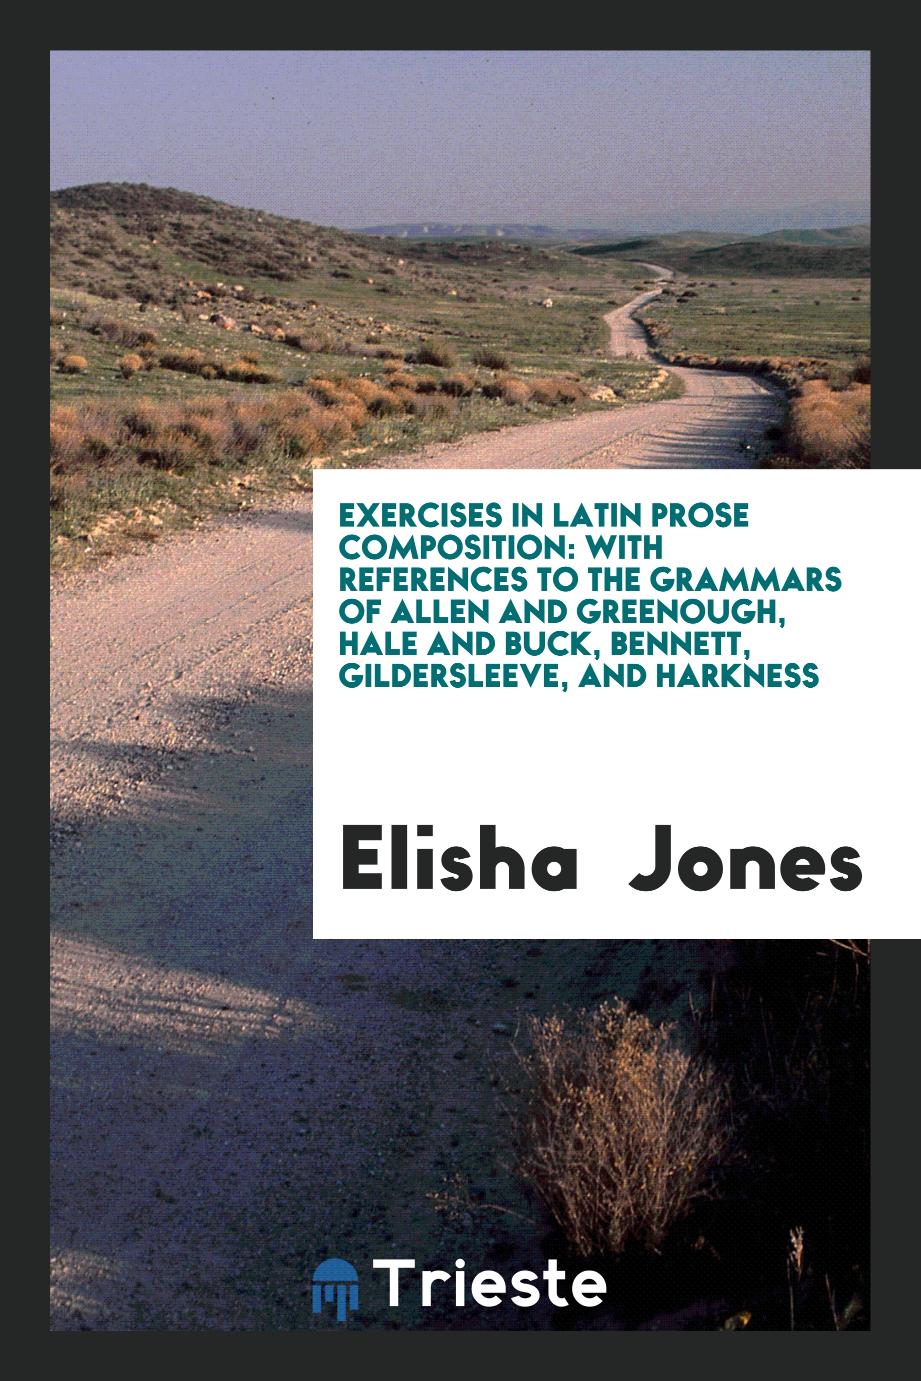 Exercises in Latin Prose Composition: With References to the Grammars of Allen and Greenough, Hale and Buck, Bennett, Gildersleeve, and Harkness